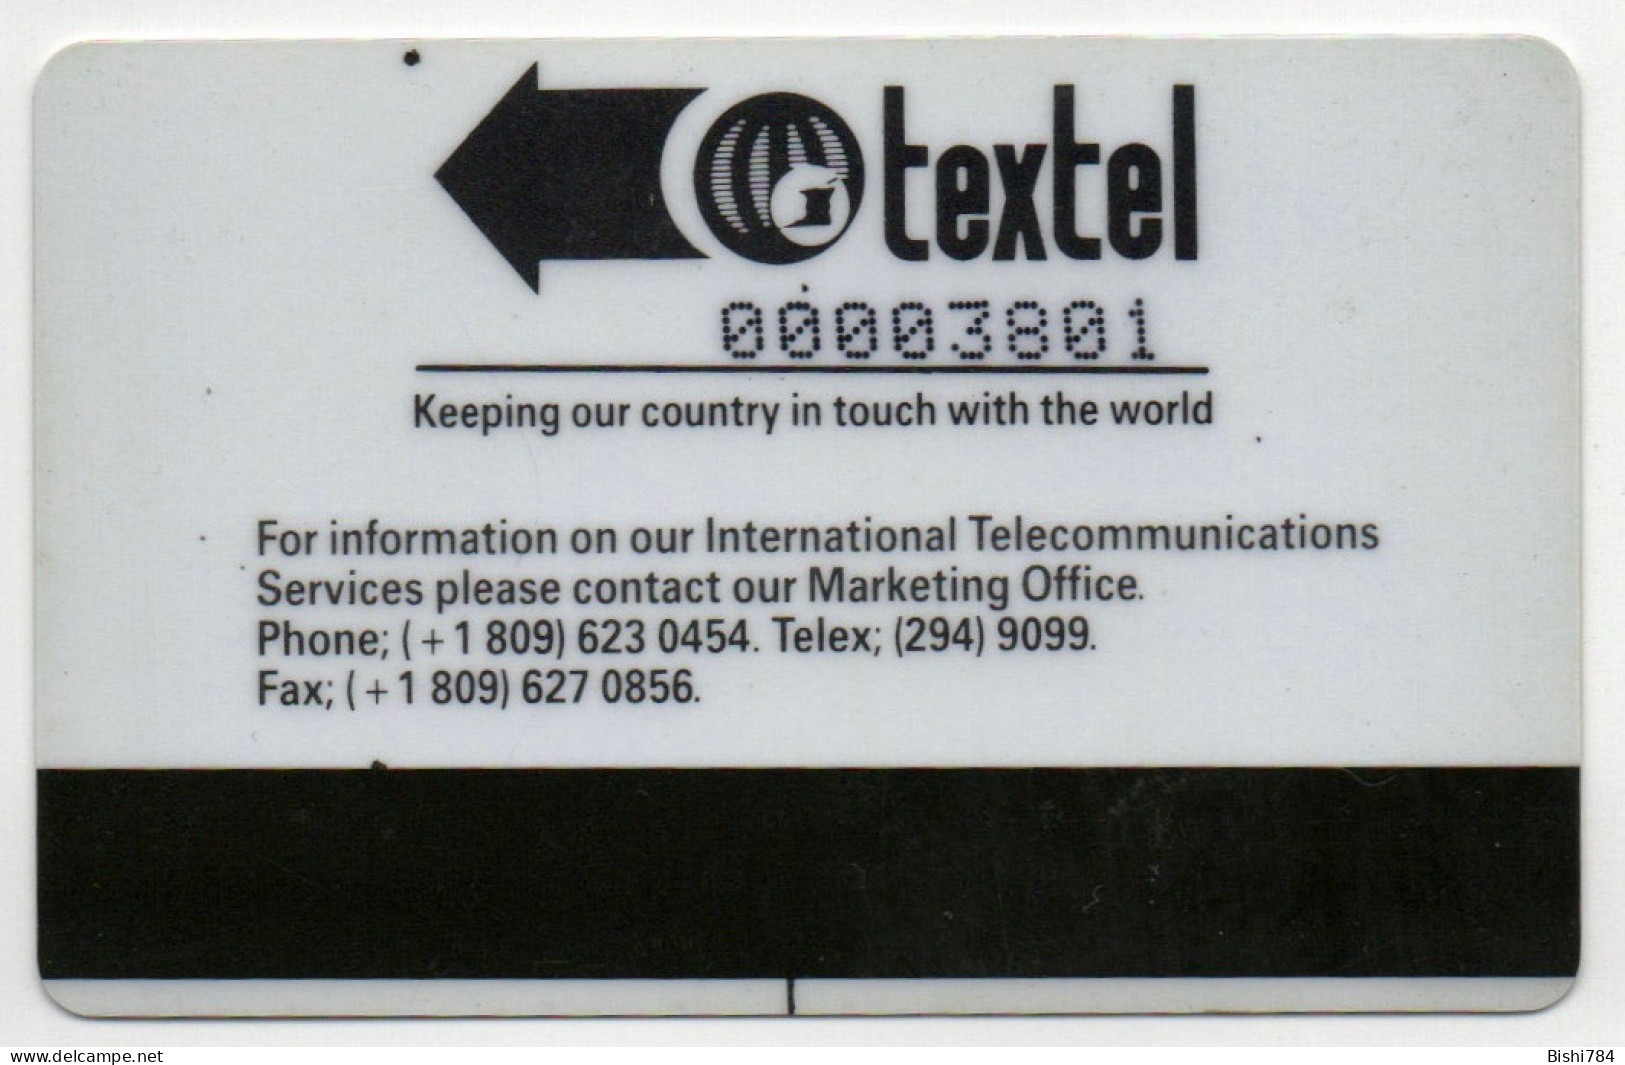 Trinidad & Tobago - Mathura Earth Station 2 (Control Number Below "Textel". With Small "I" Below The Magnetic Band) - Trinidad & Tobago